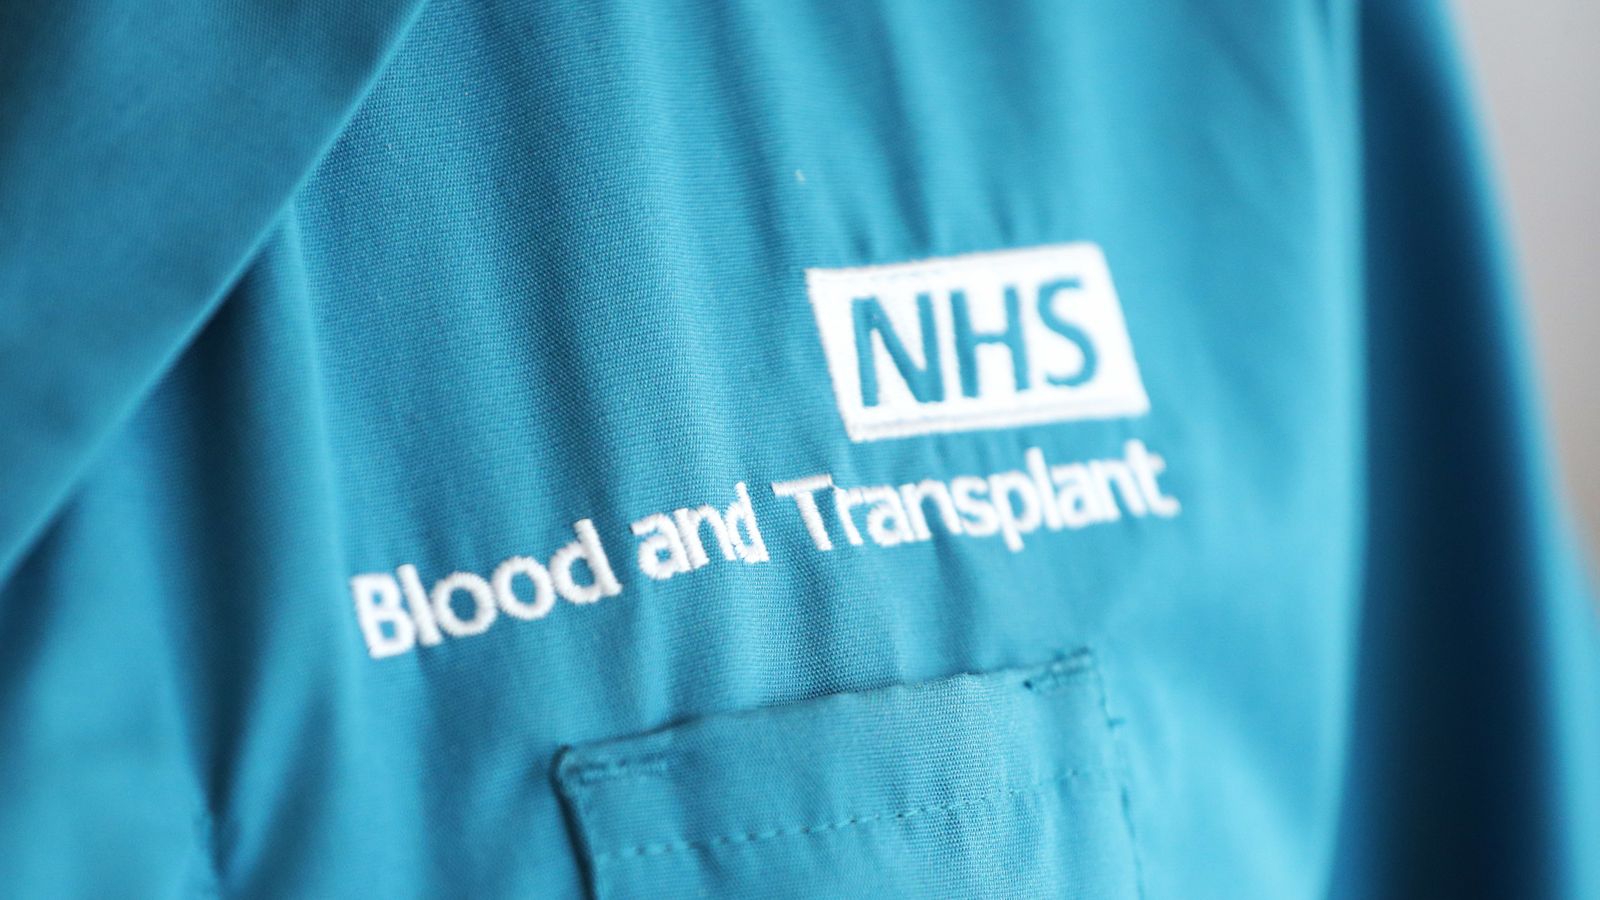 People asked to give important gift this Christmas - a donation of blood to the NHS